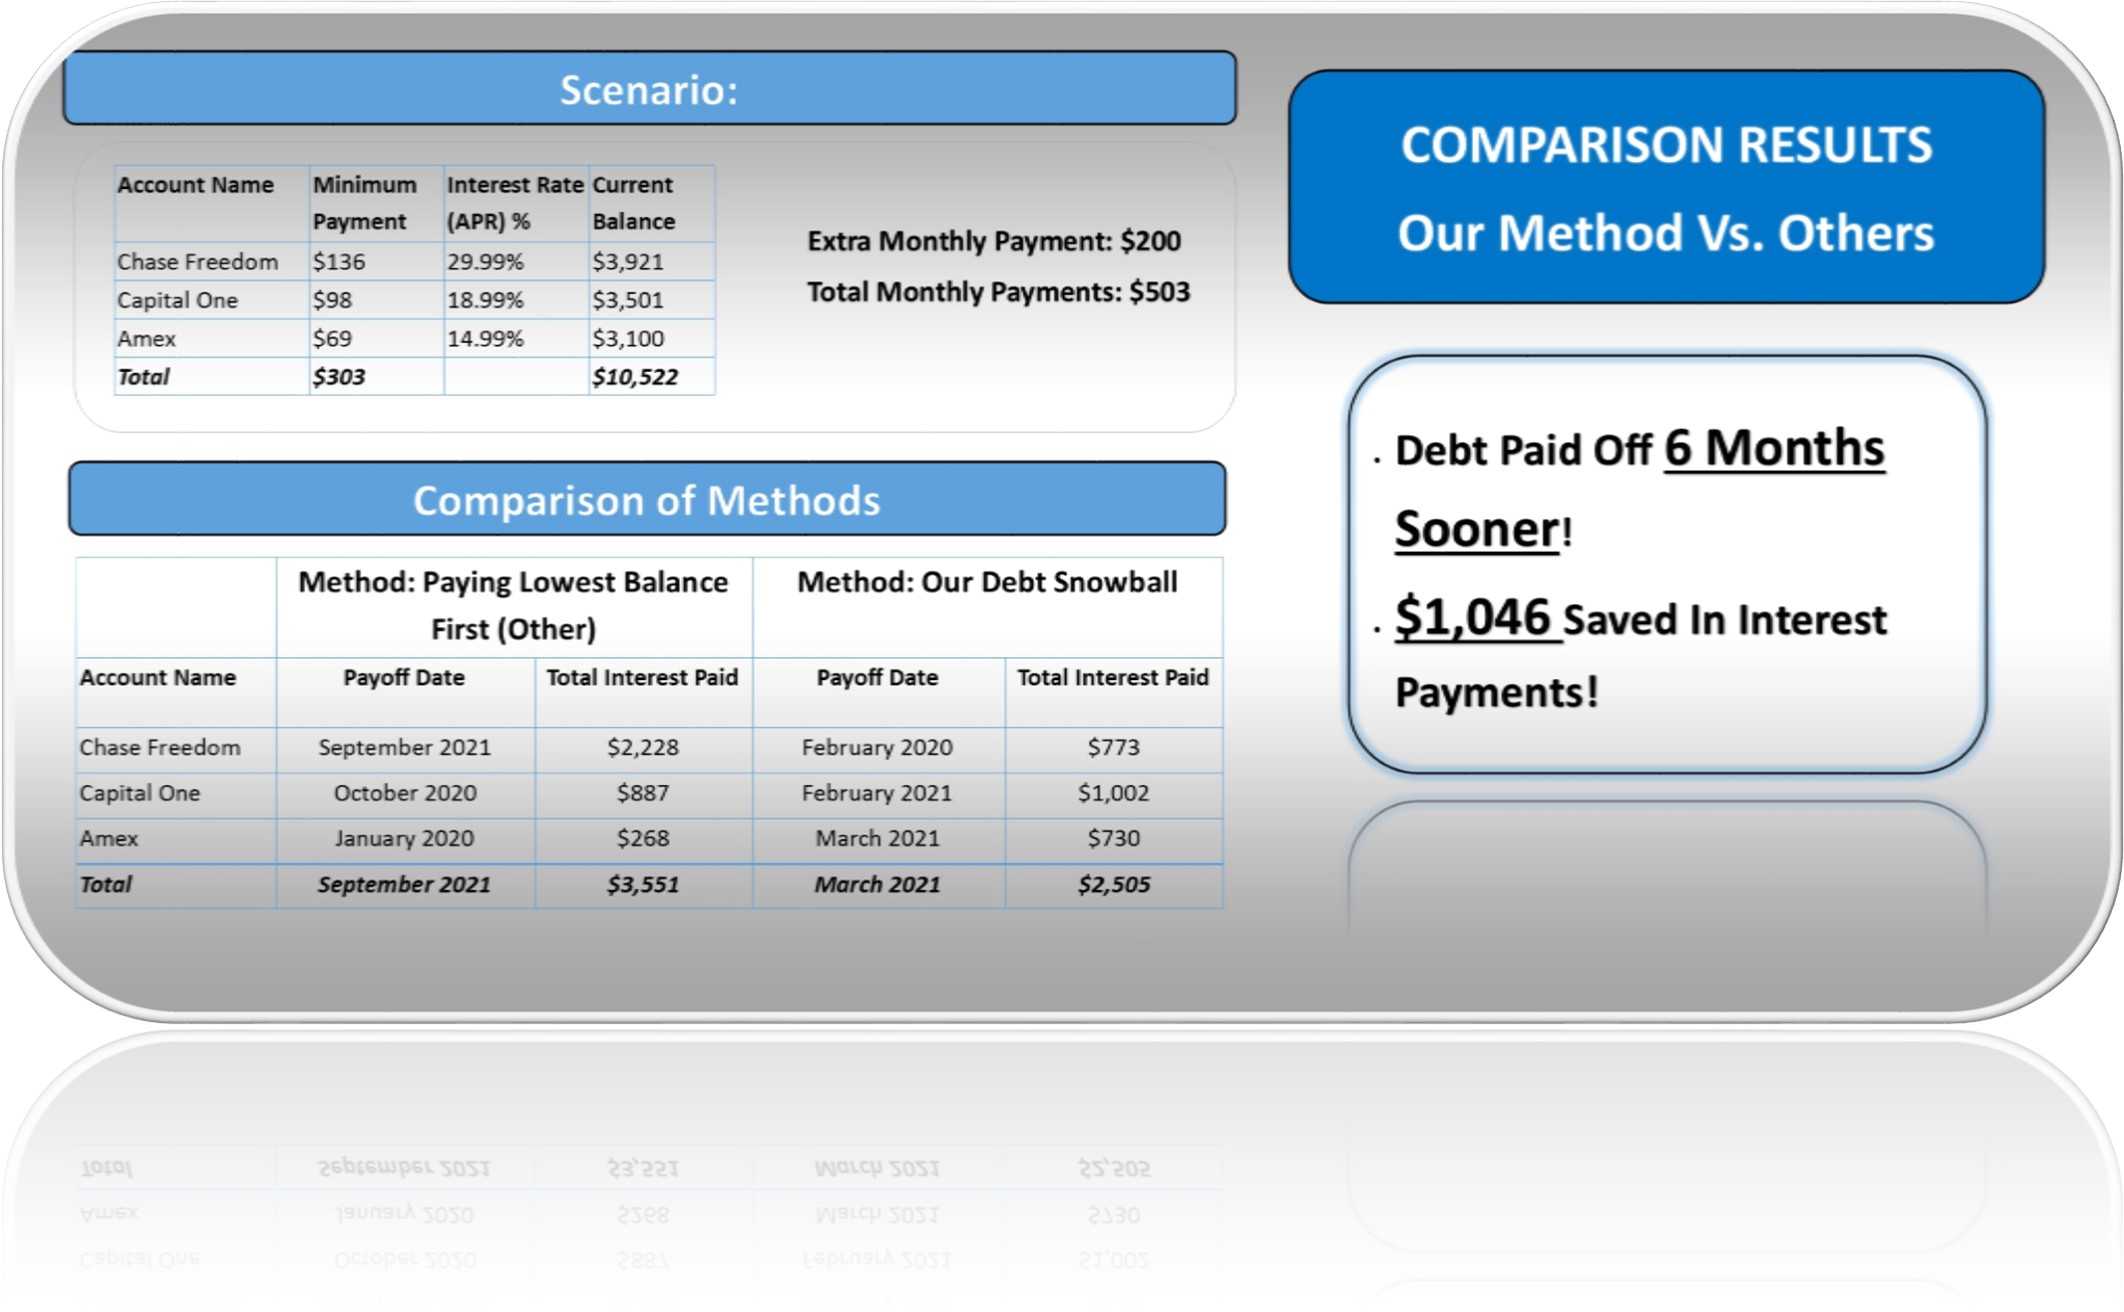 Credit Card Payoff Preadsheet Debt Nowball Calculator Excel Pertaining To Credit Card Interest Calculator Excel Template